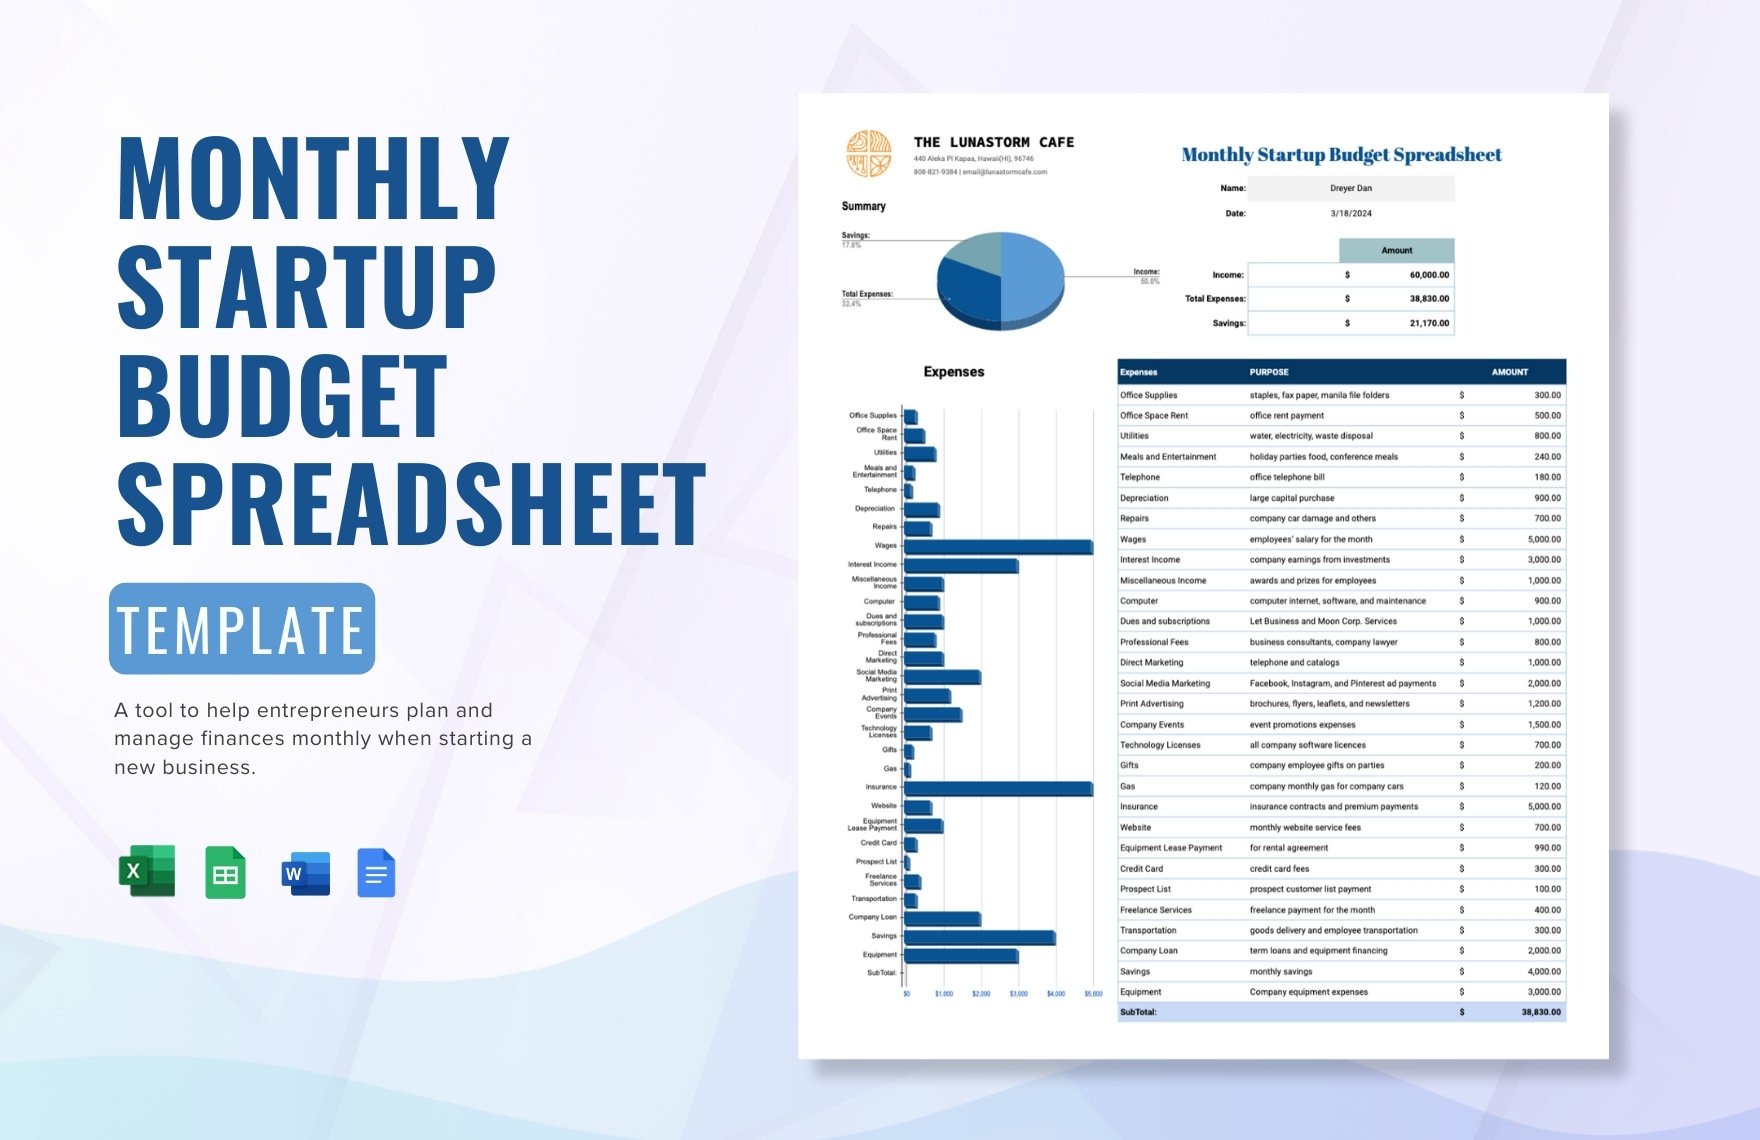 Monthly Startup Budget Spreadsheet Templates in GDocsLink MS Word MS